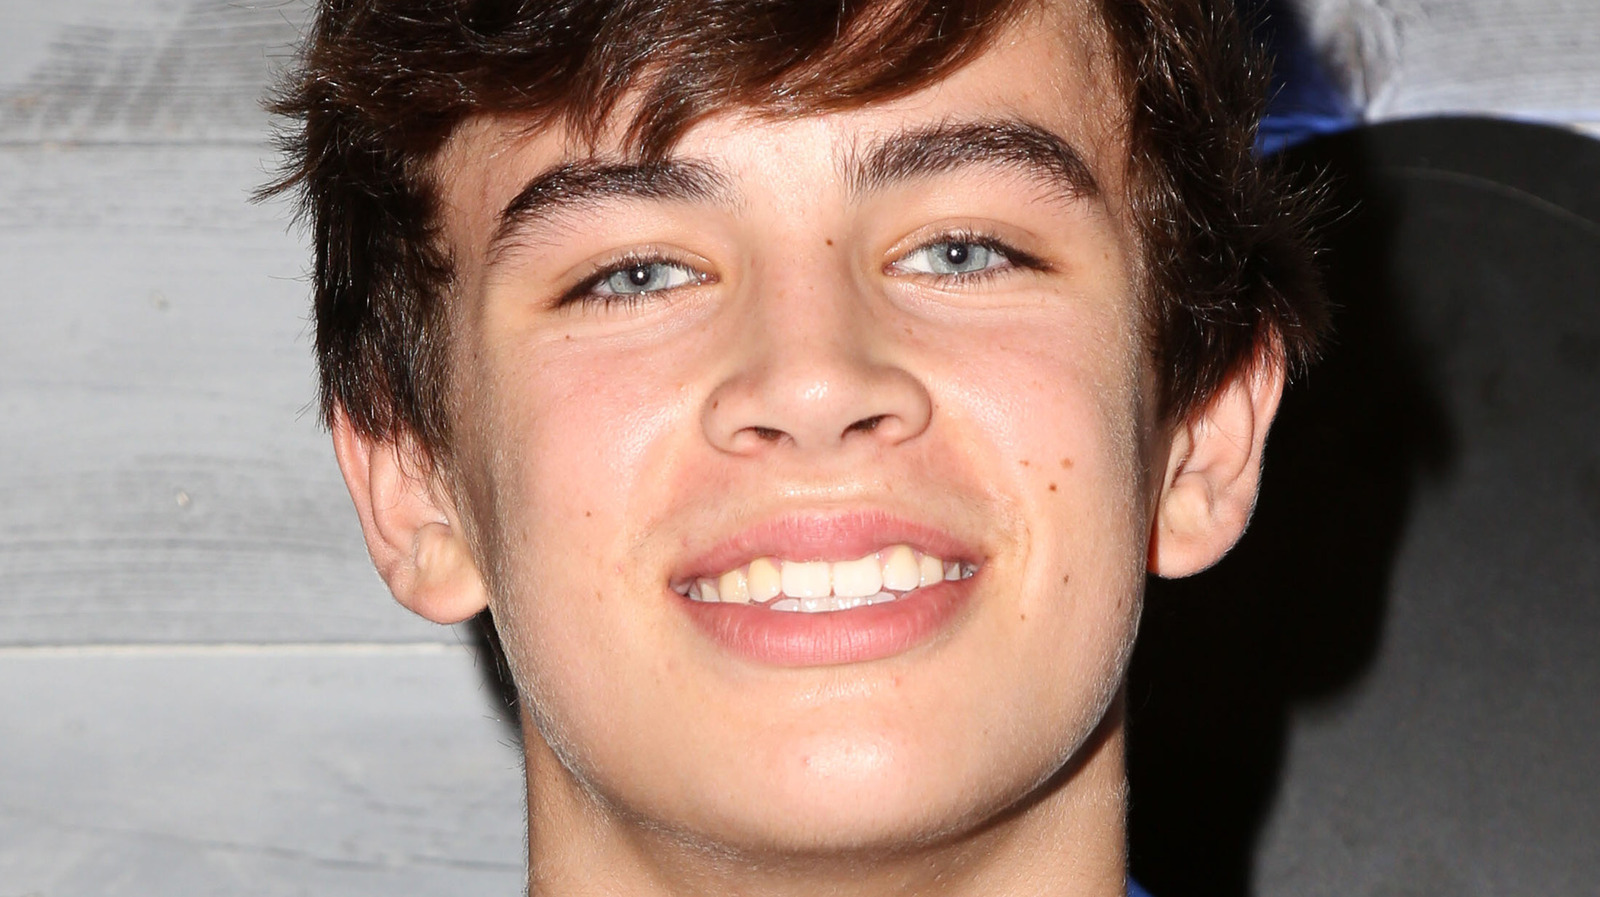 The Real Reason Dwts Alum Hayes Grier Got Arrested